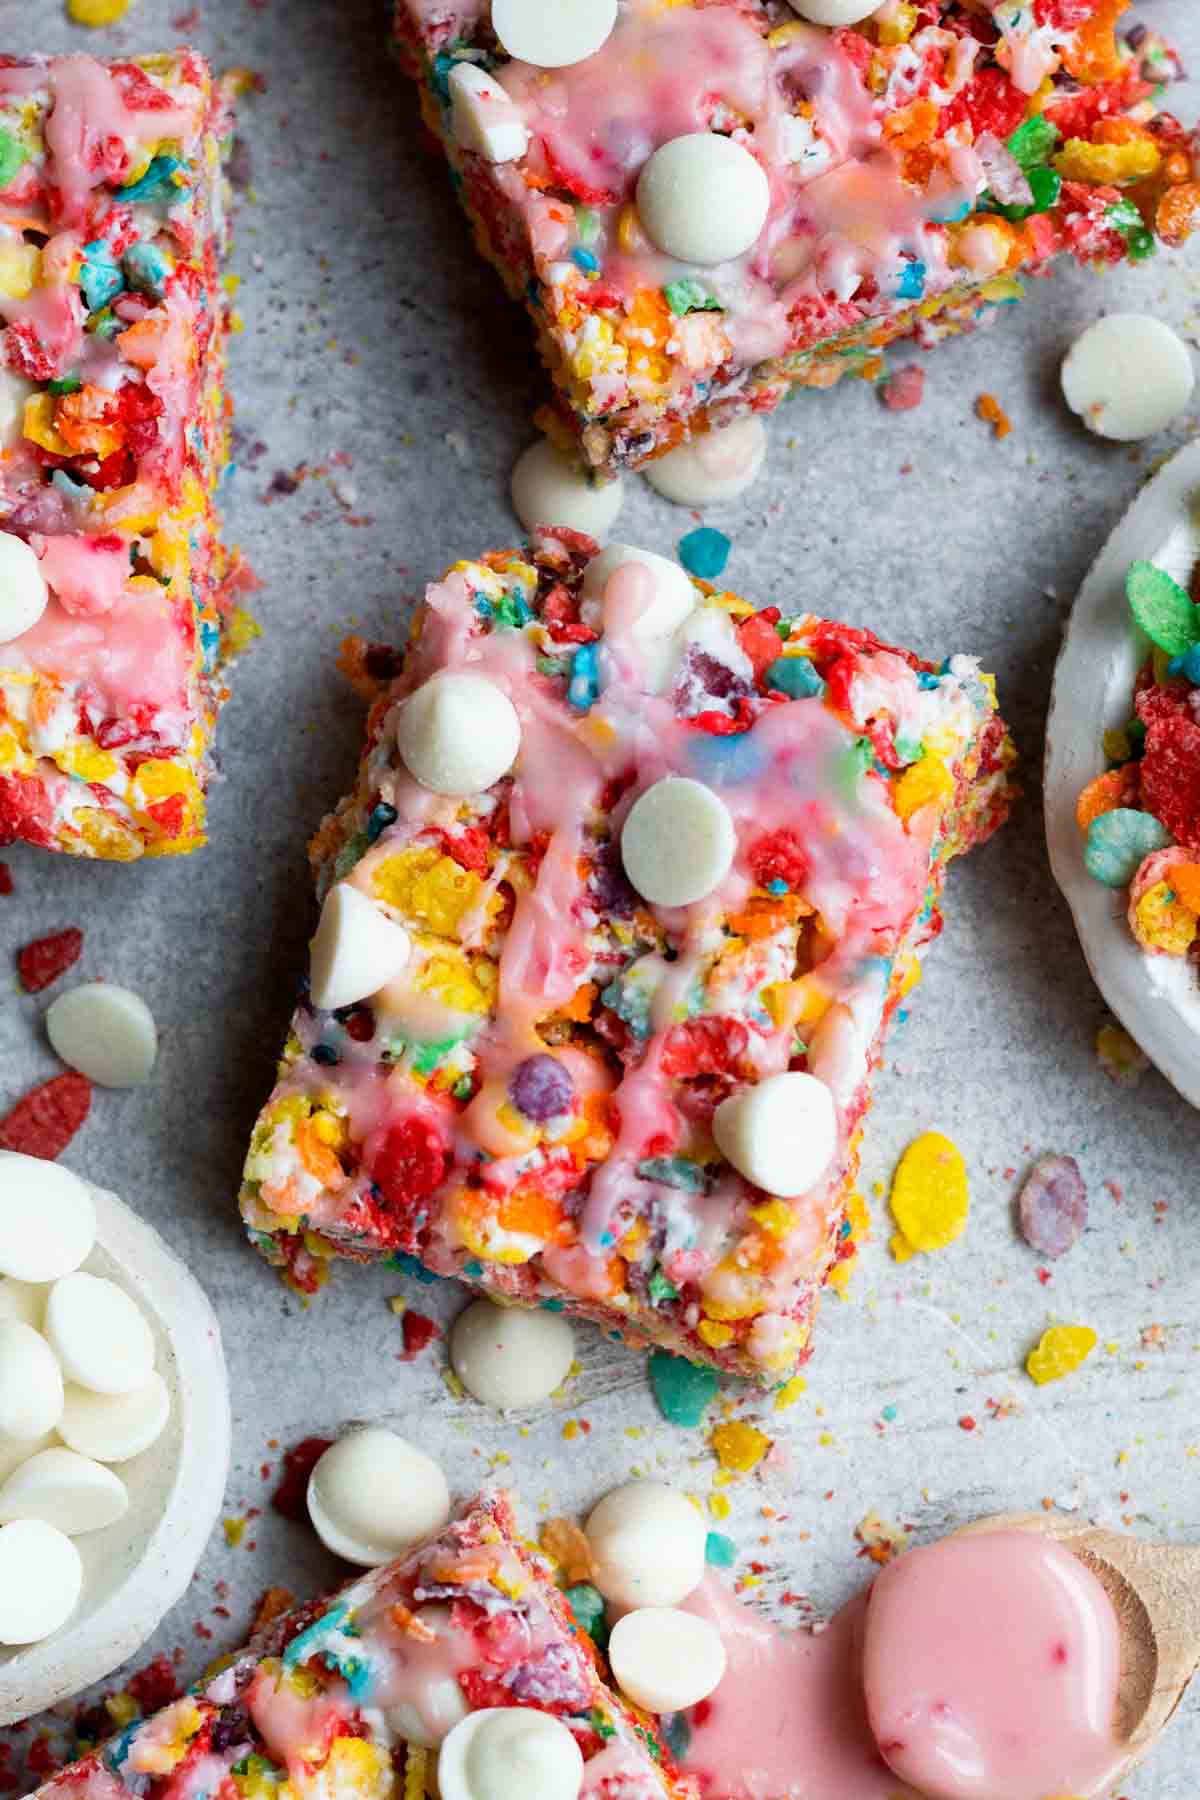 Colorful rectangular Fruity Pebble Treats topped with white chocolate chips and raspberry drizzle.